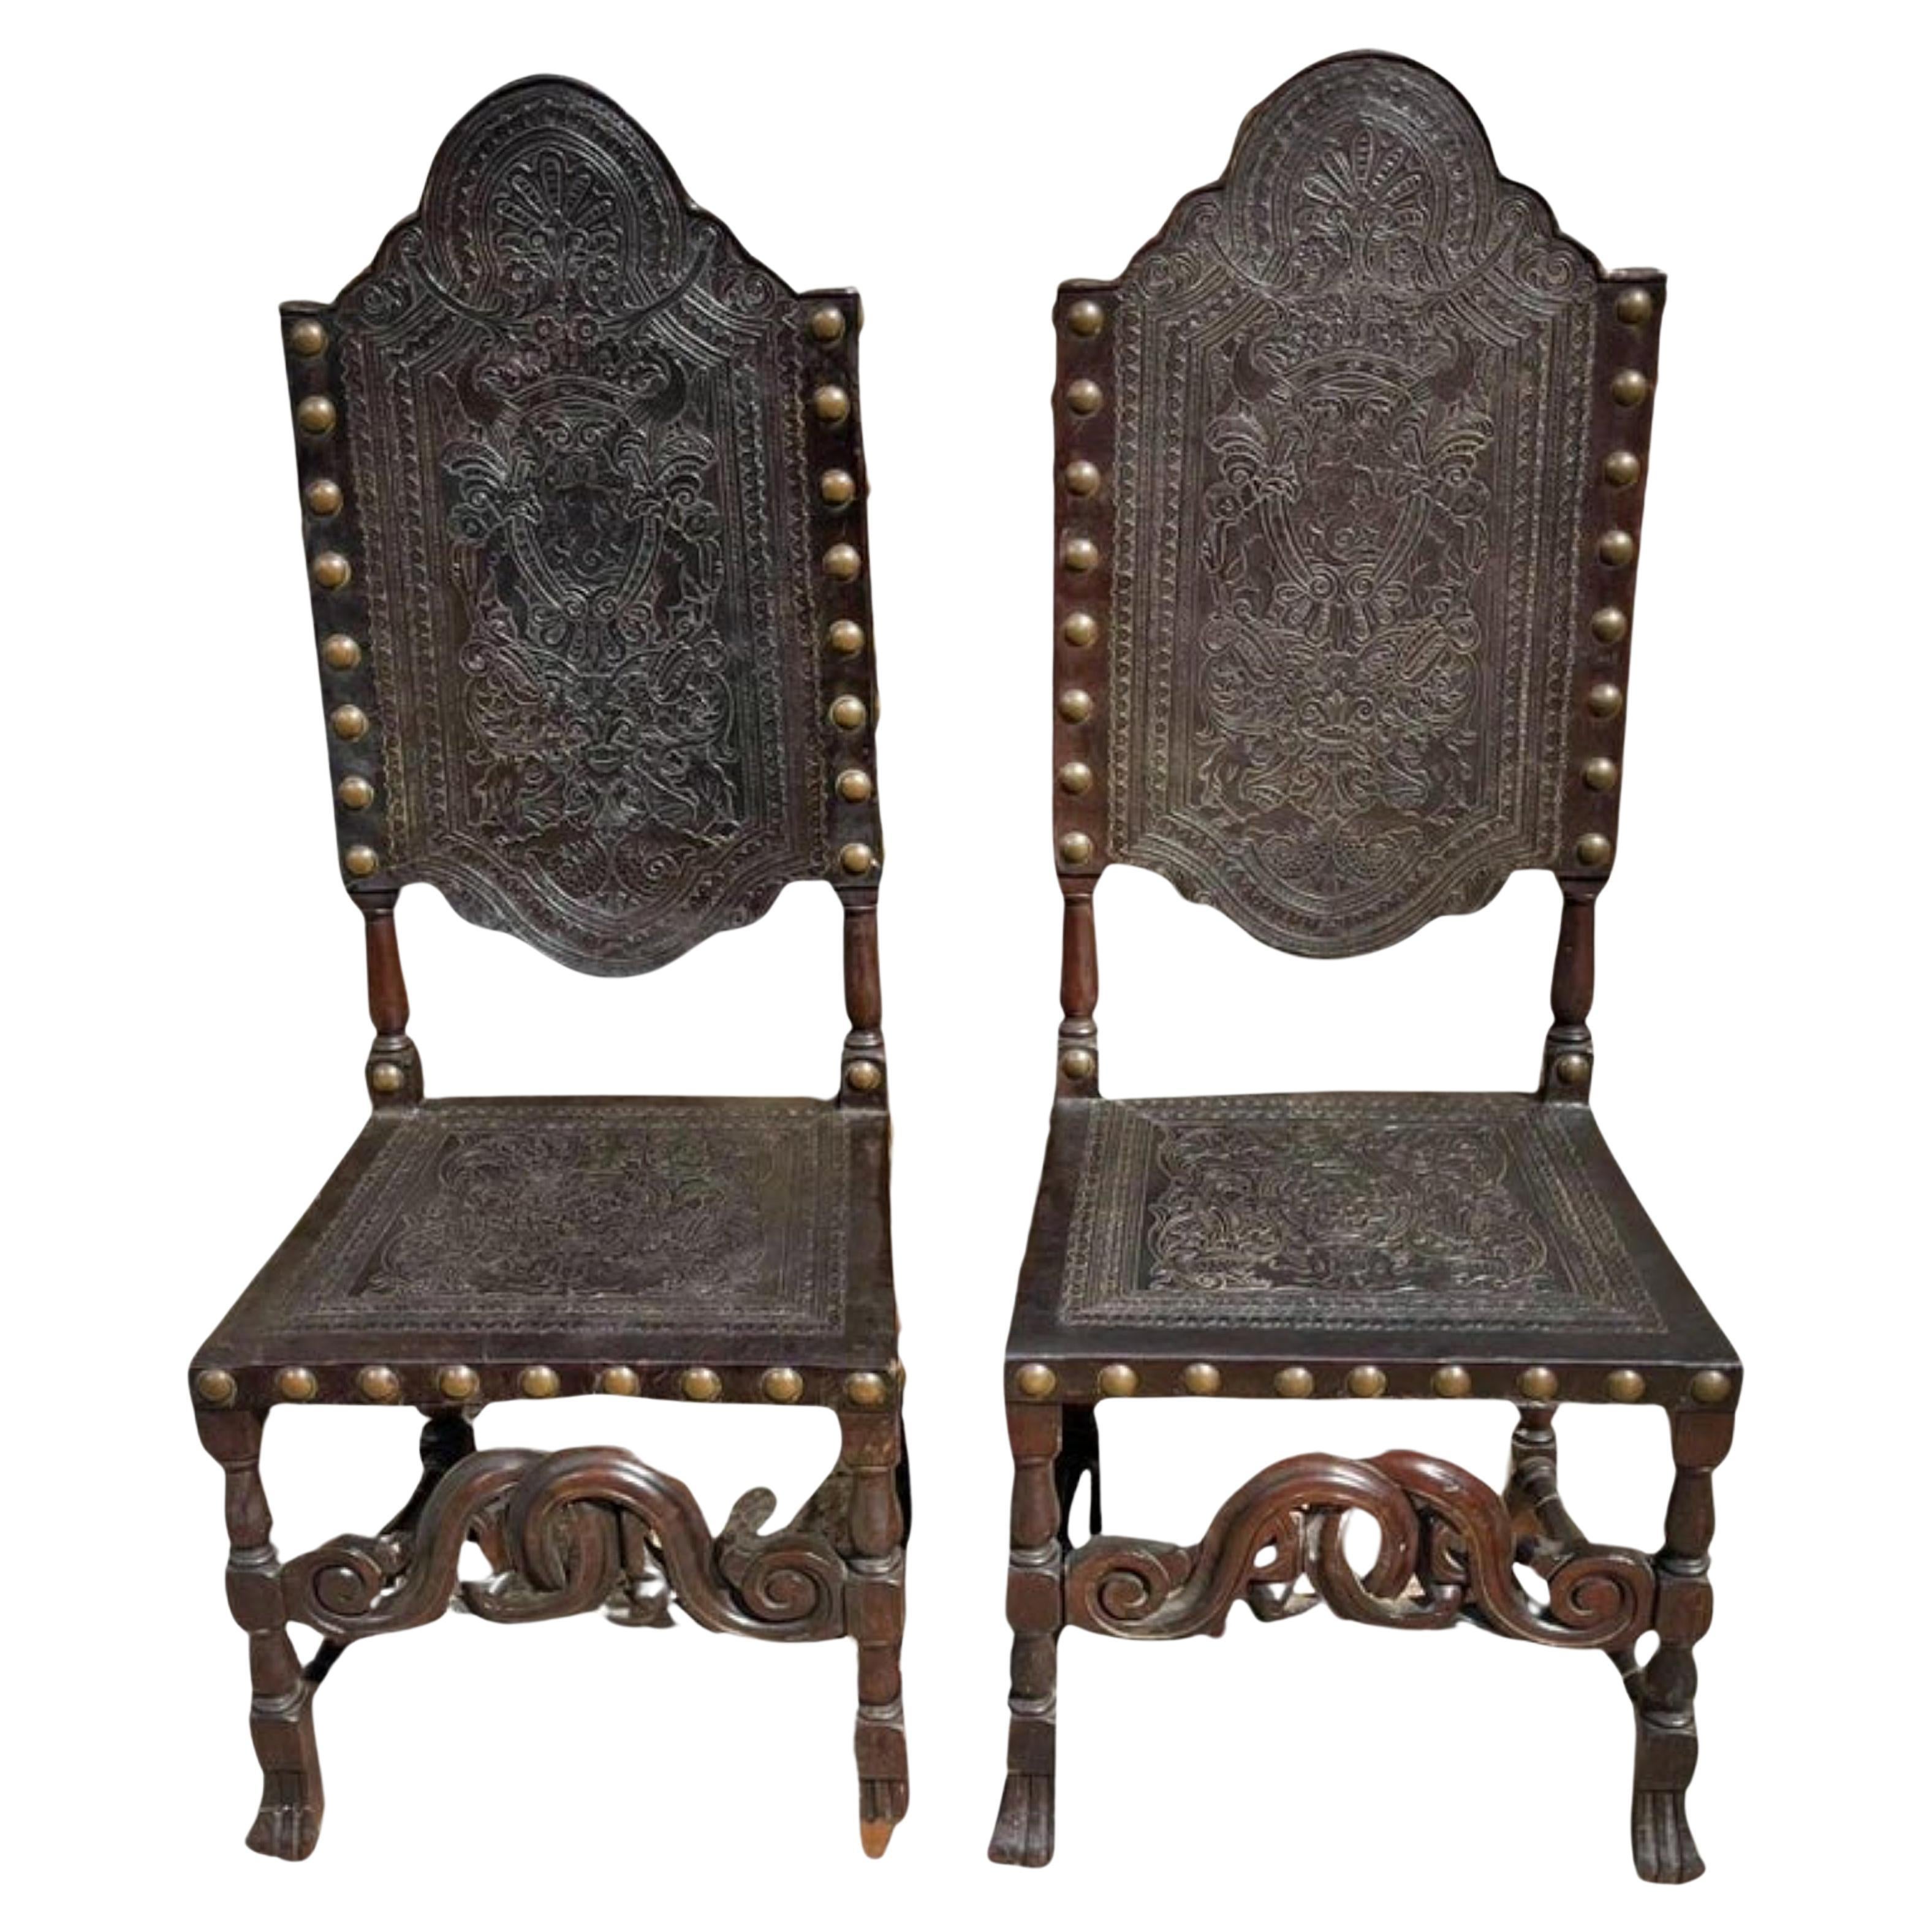 Portuguese Pair of High-Backed Chairs, 18th Century